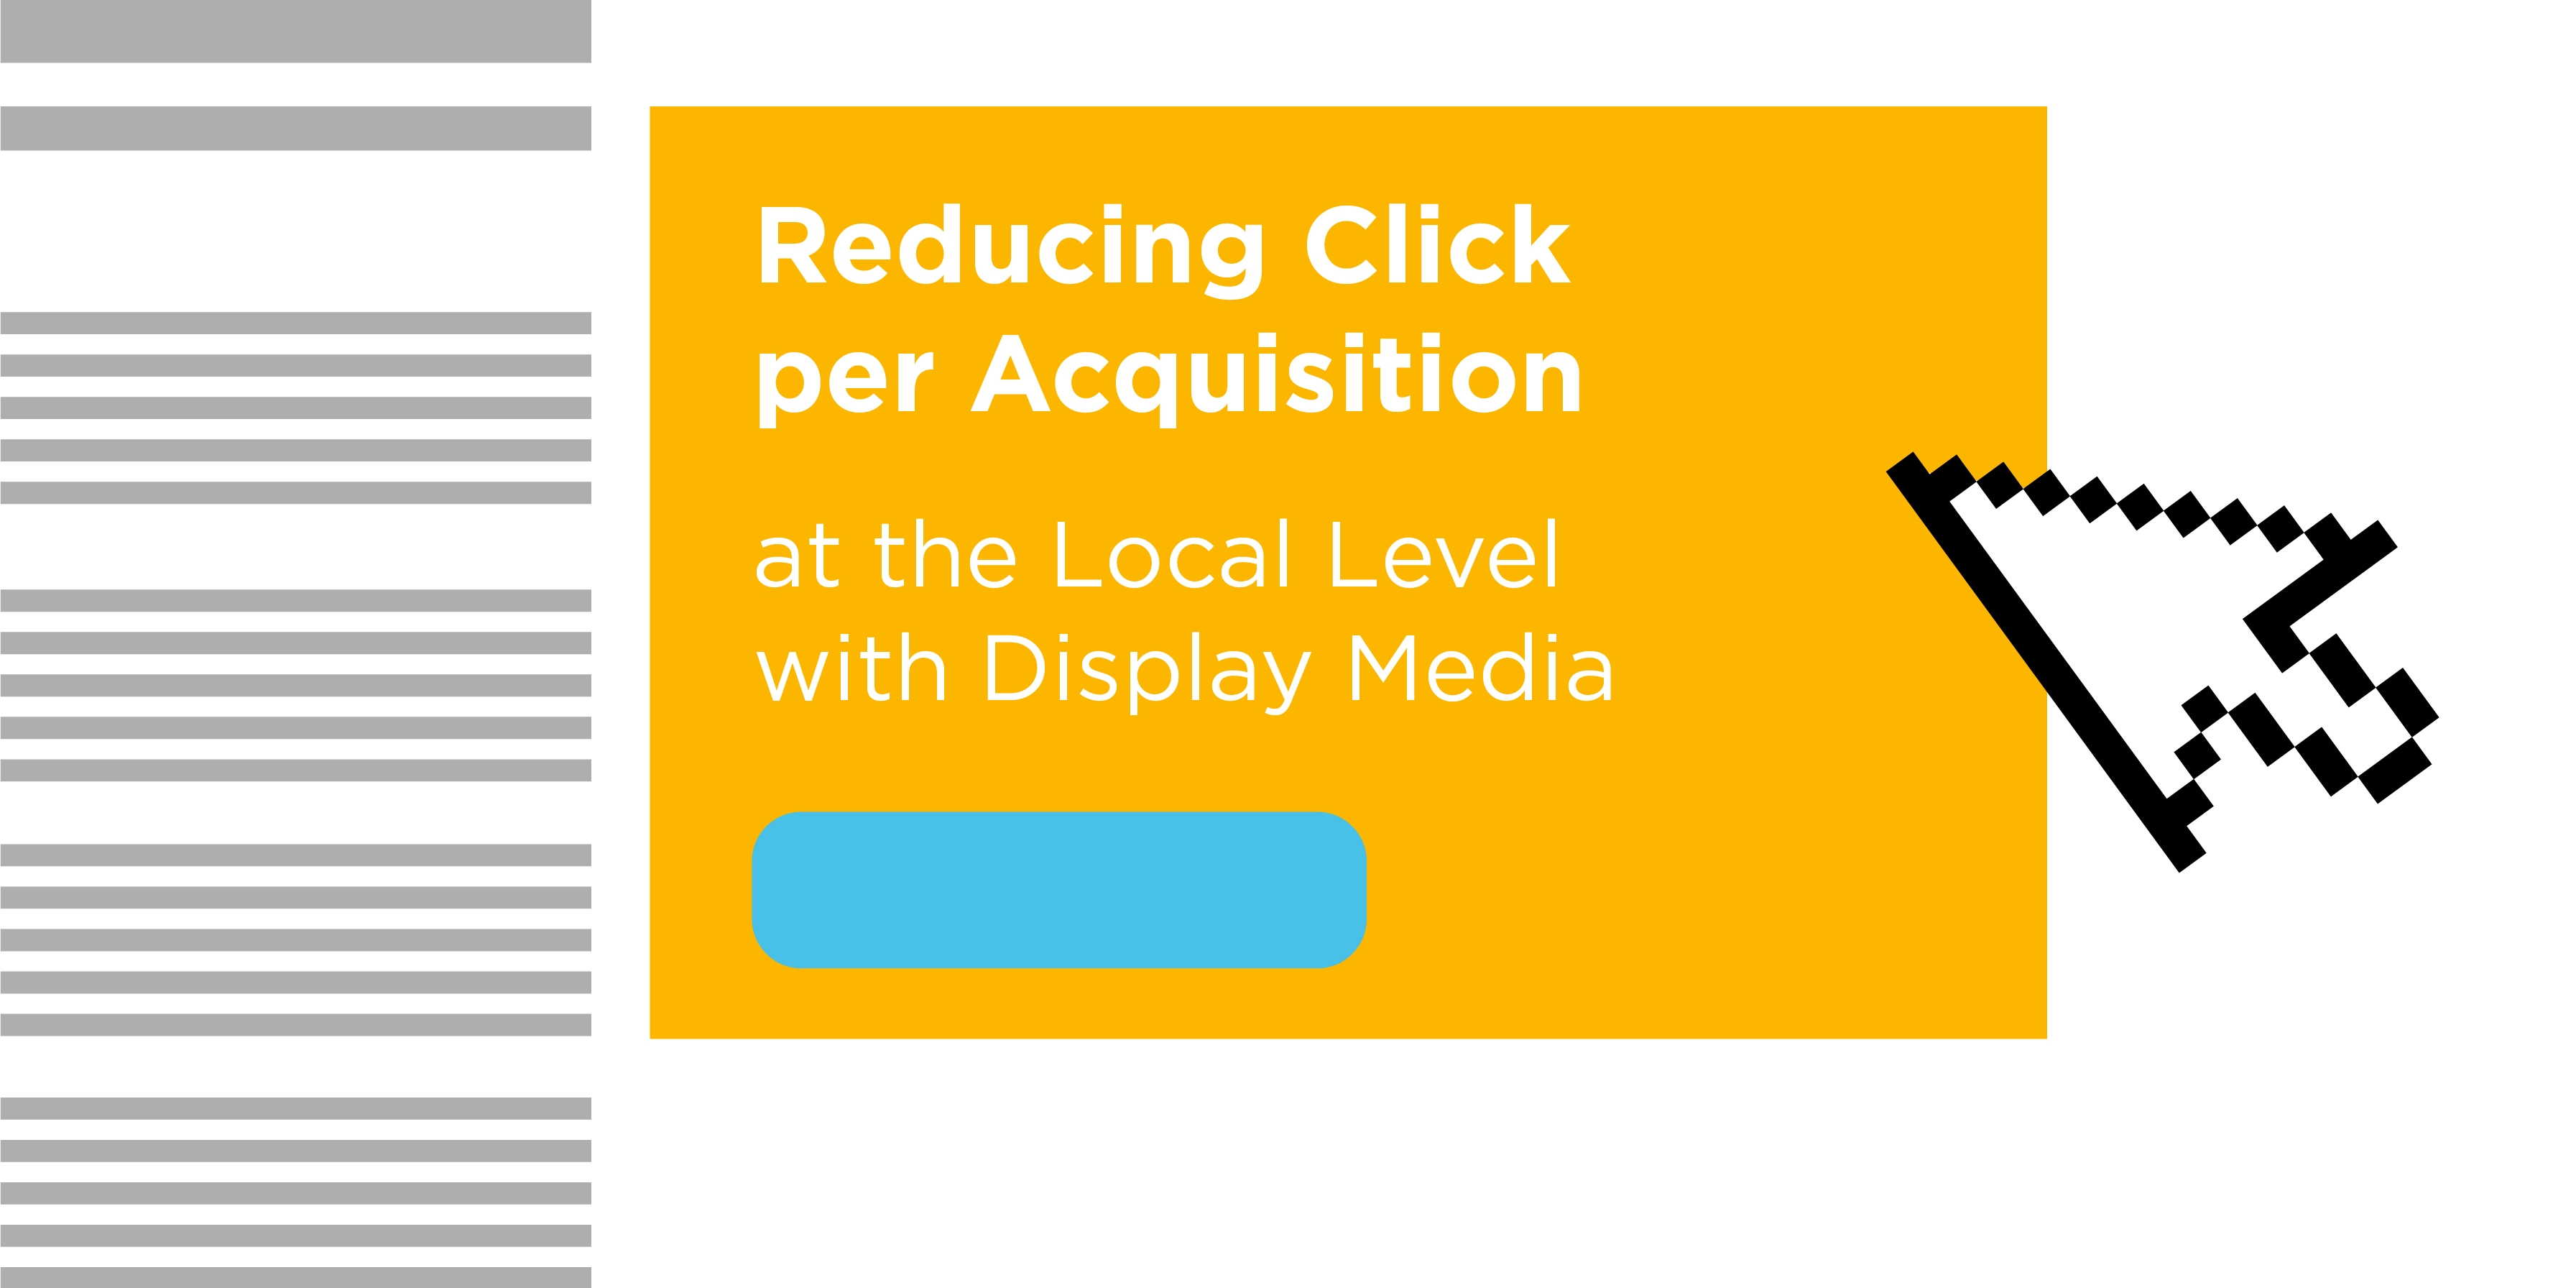 Reducing Click Per Acquisition at the Local Level with Display Media